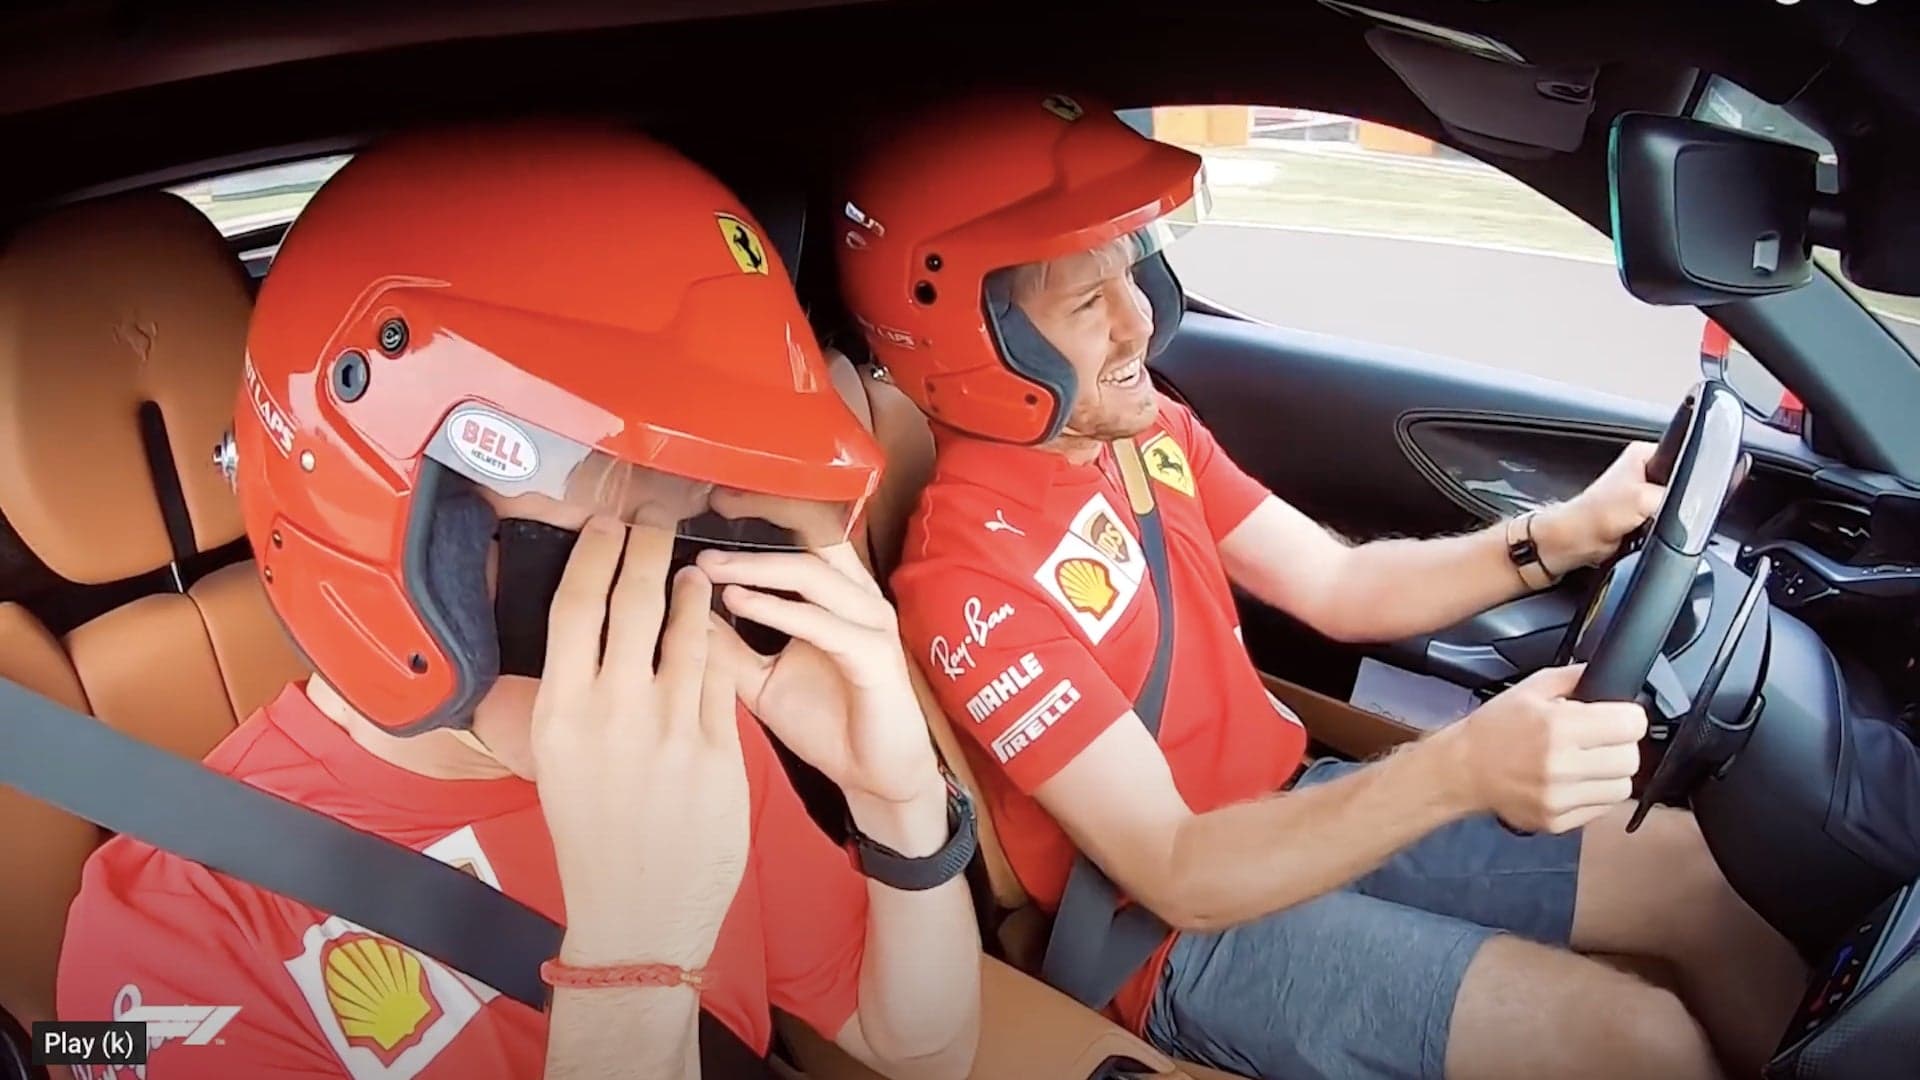 Watch Ferrari F1 Drivers Vettel and Leclerc Make Each Other Sick in an SF90 Stradale